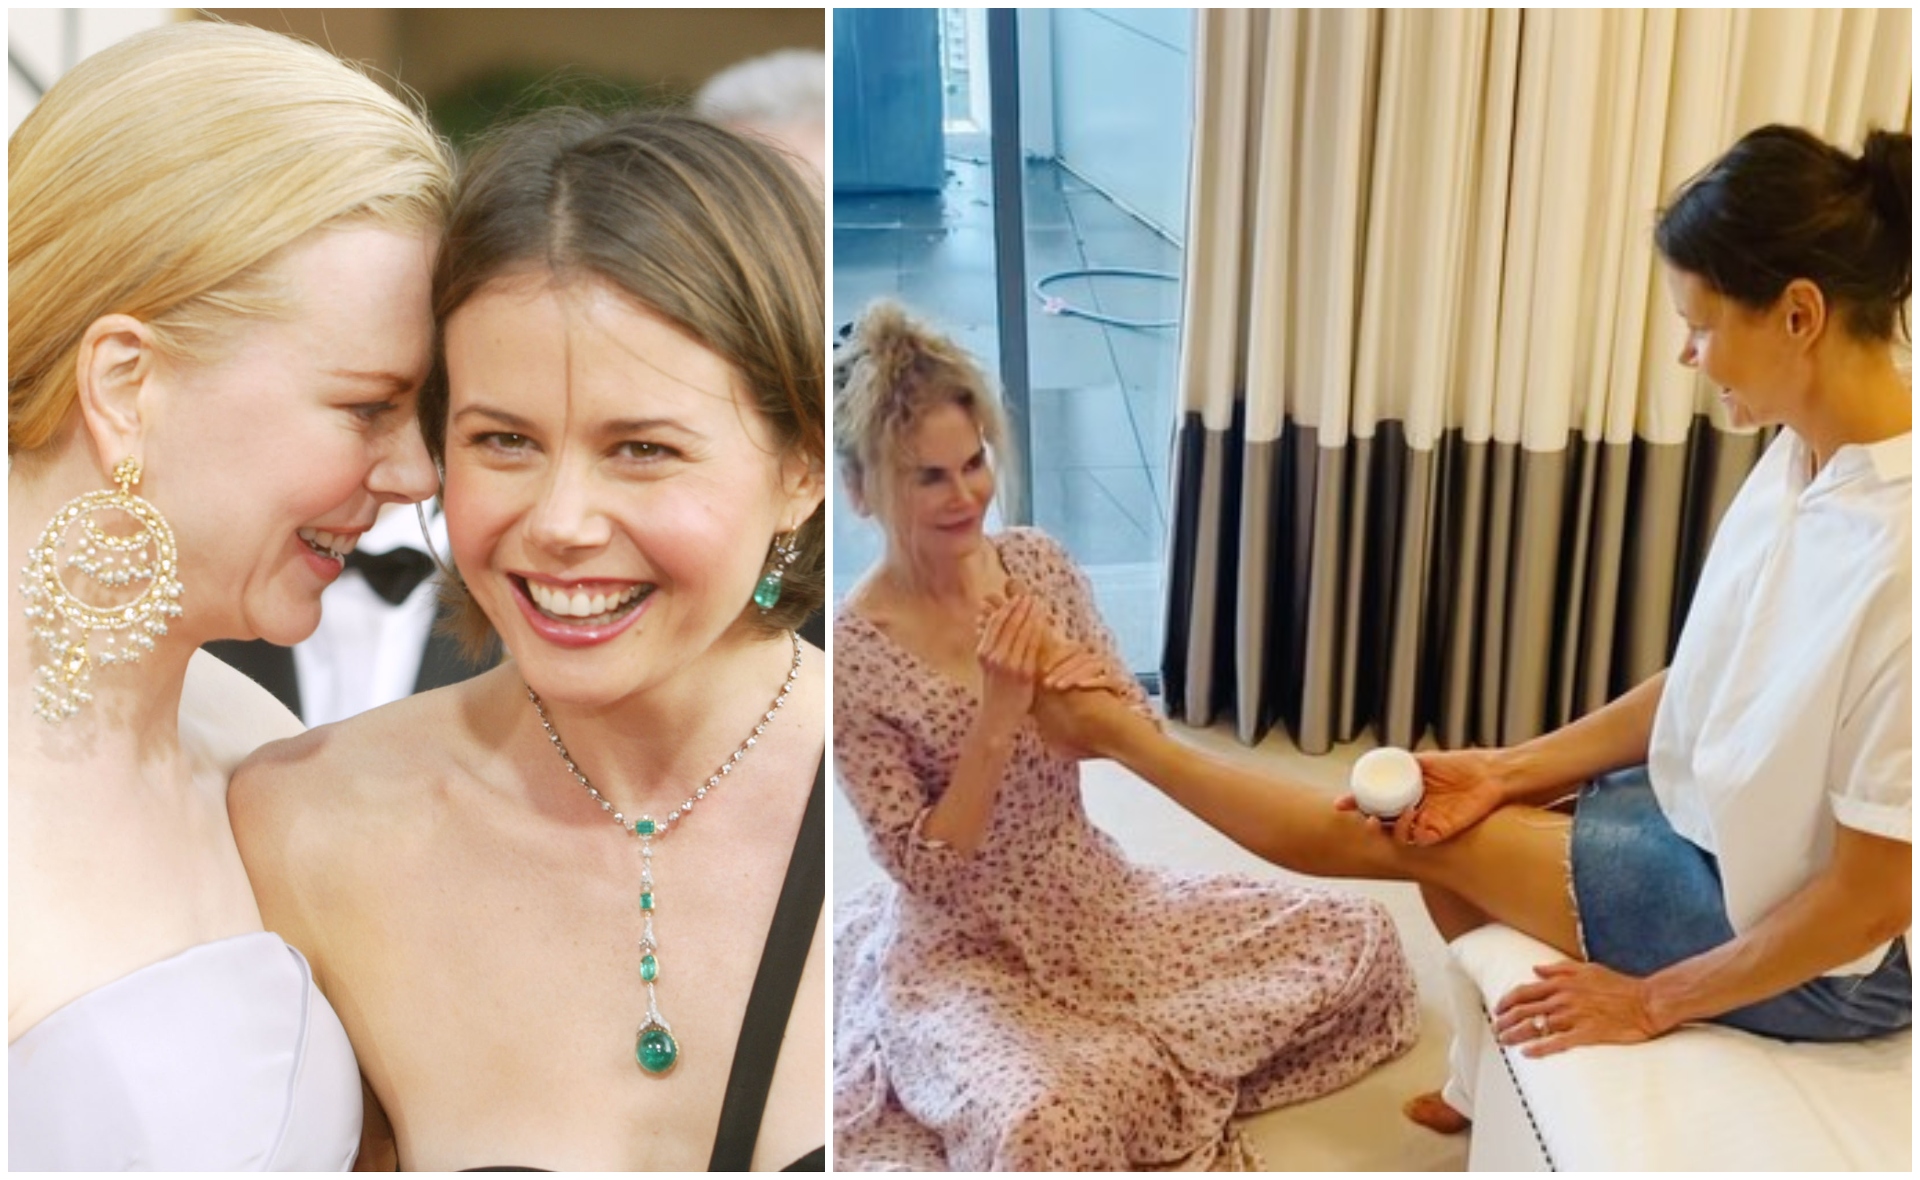 We need to talk about Nicole Kidman’s new video with her younger sister Antonia